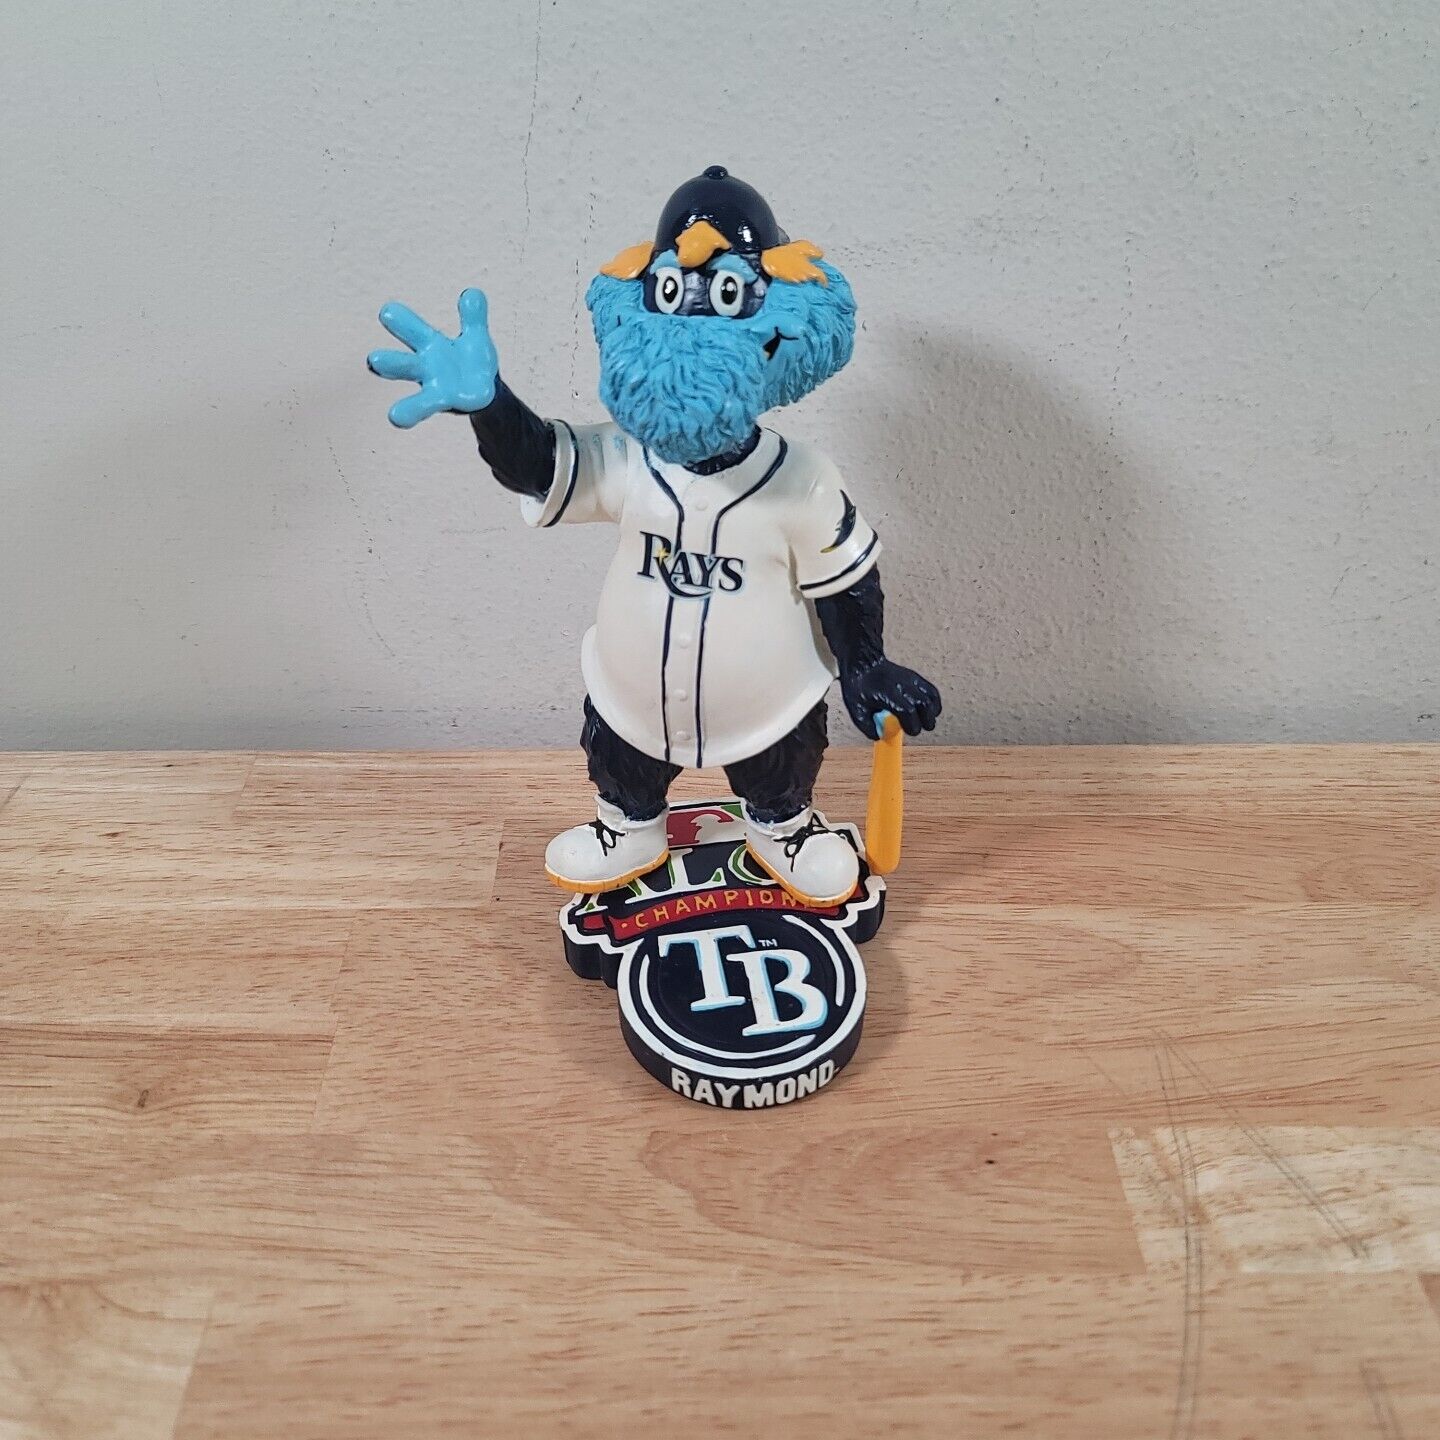 2008 ALCS Tampa Bay Rays Raymond Bobblehead Forever Collectibles